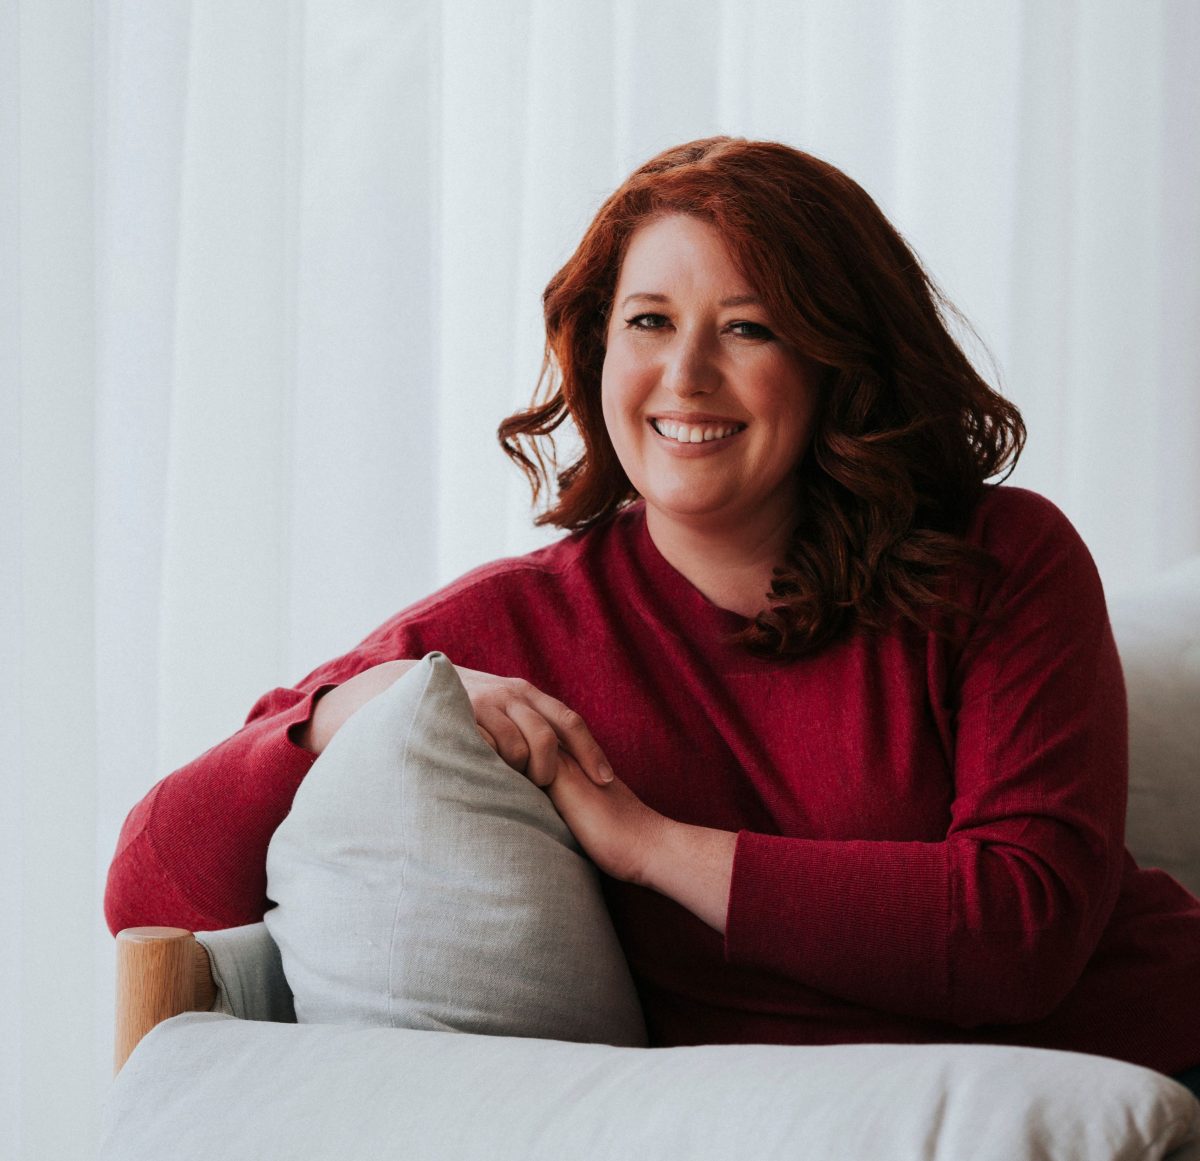 Jane Harper in a red shirt and smiling at the camera while leaning on the back of a couch